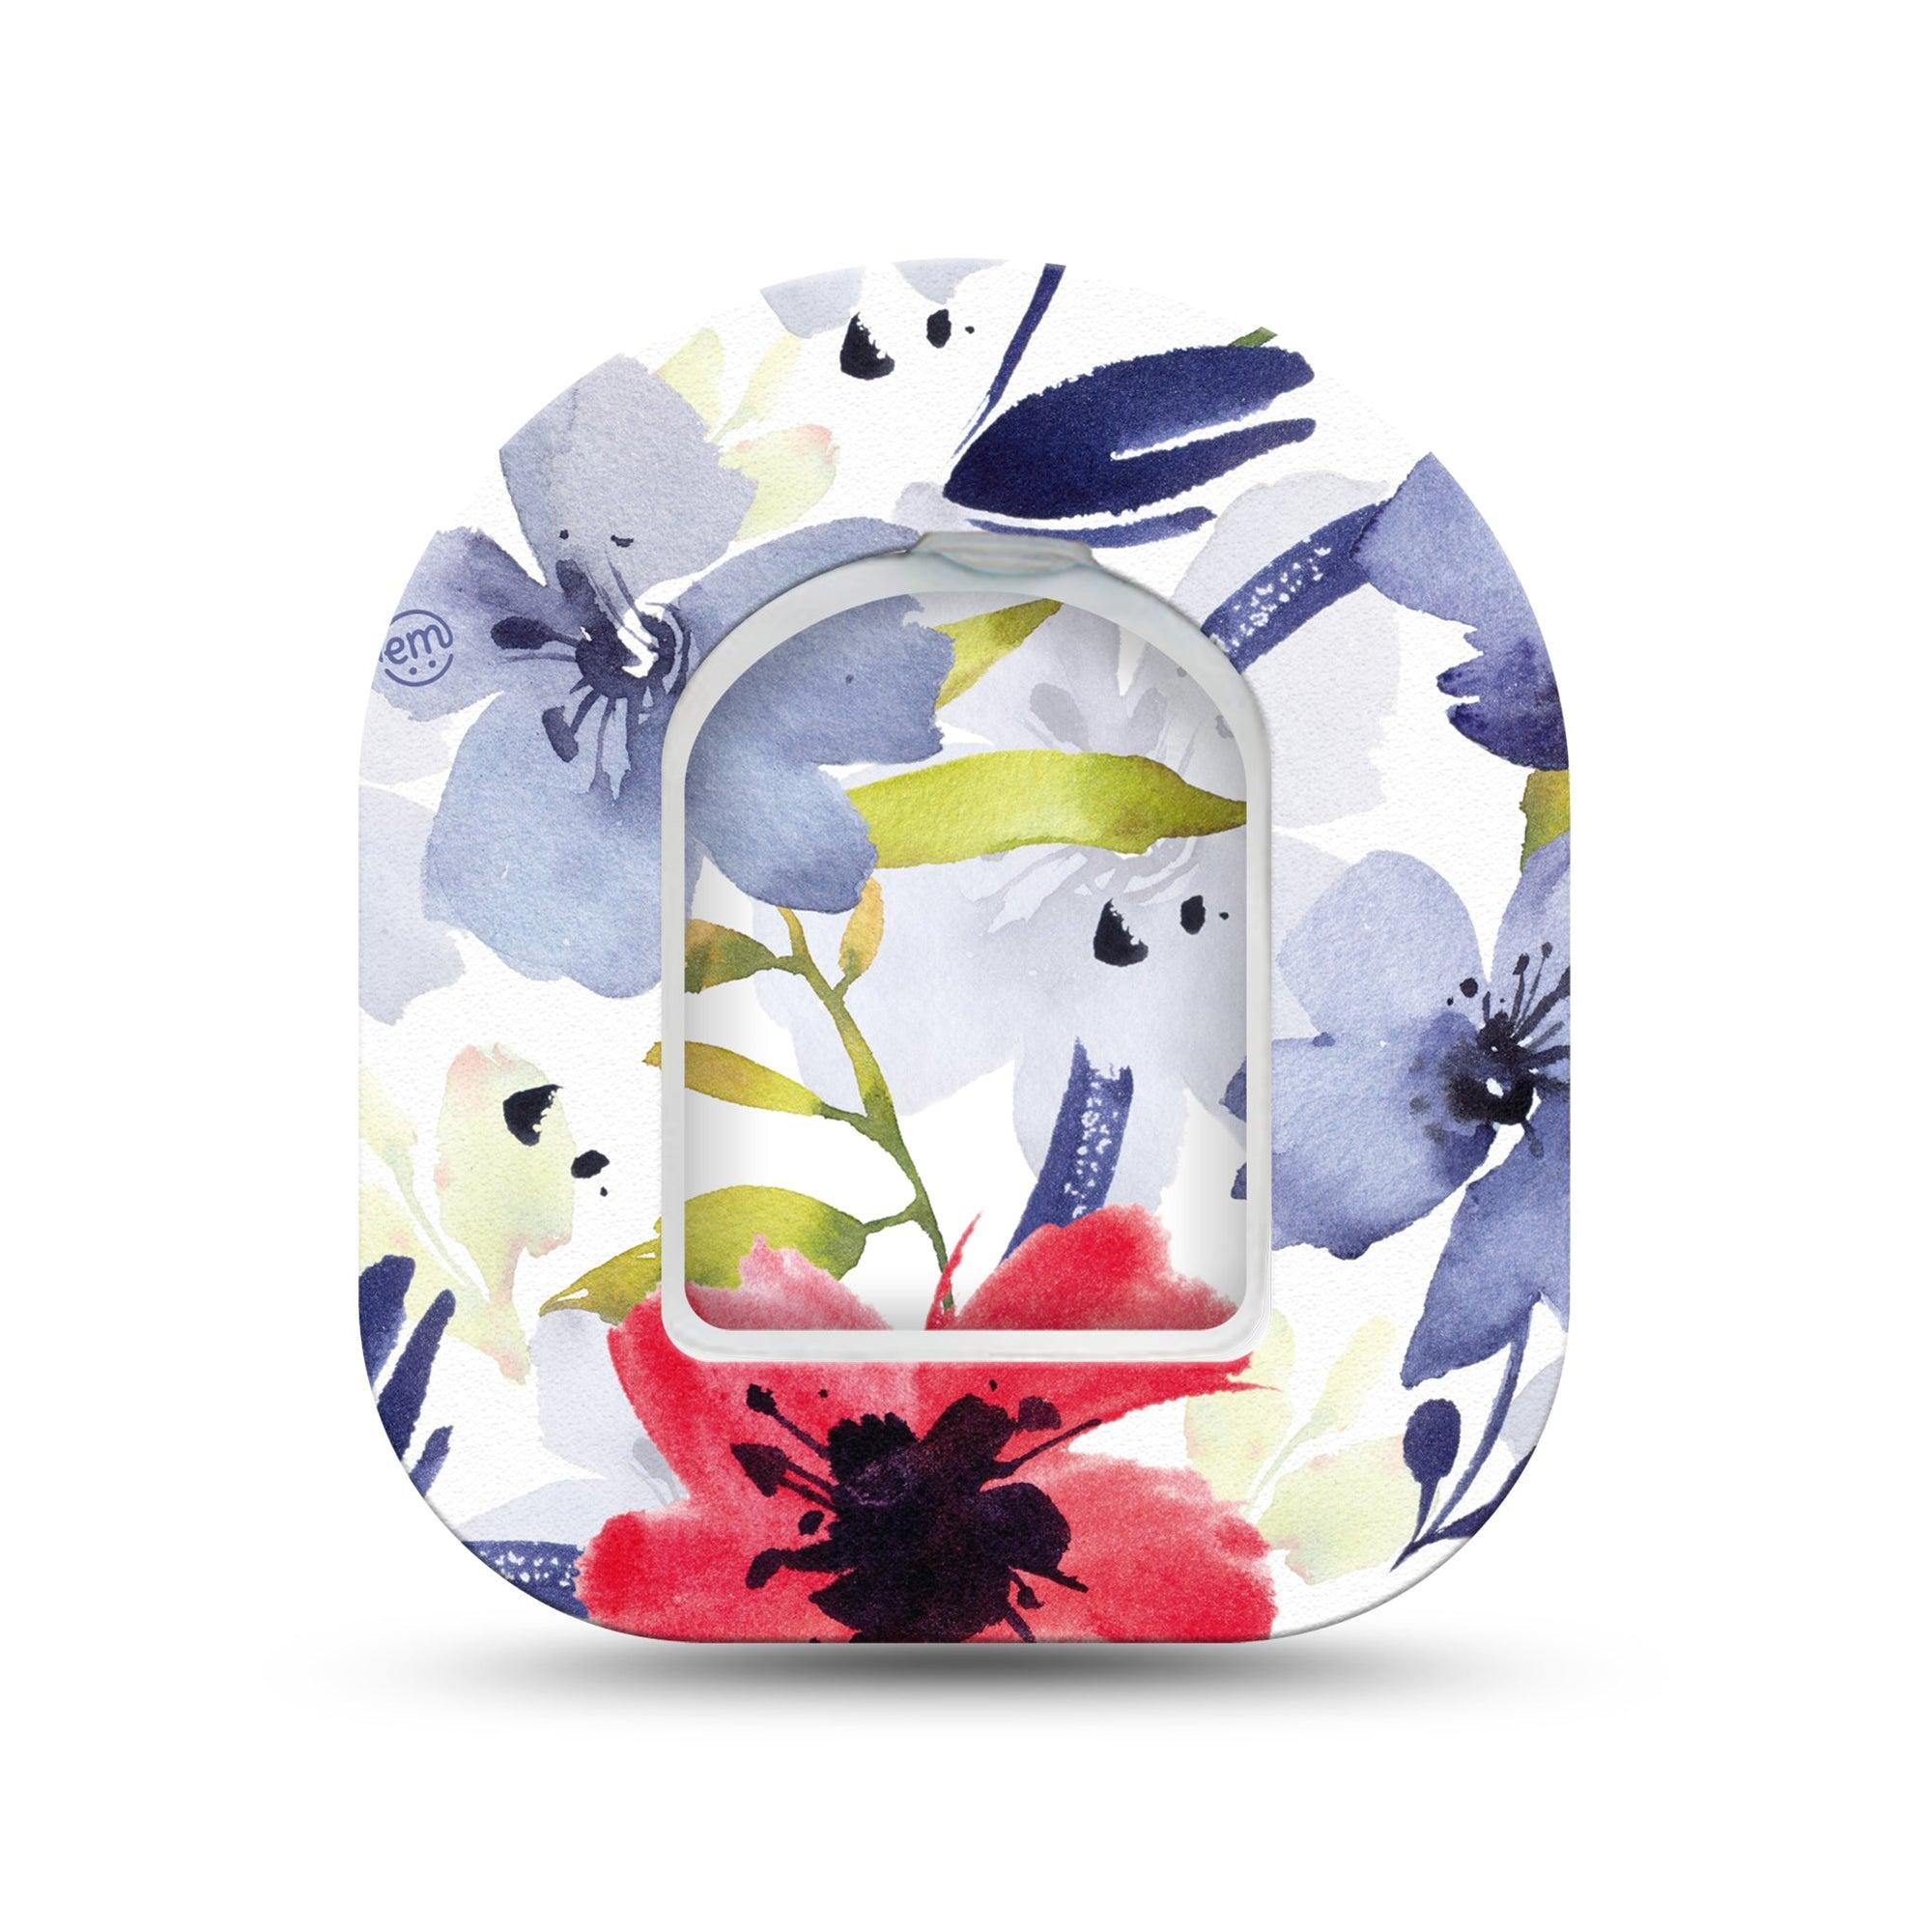 ExpressionMed Red, White, & Blue Flowers Omnipod Surface Center Sticker and Mini Tape Watercolored Florals Themed Vinyl Sticker and Tape Design Pump Design